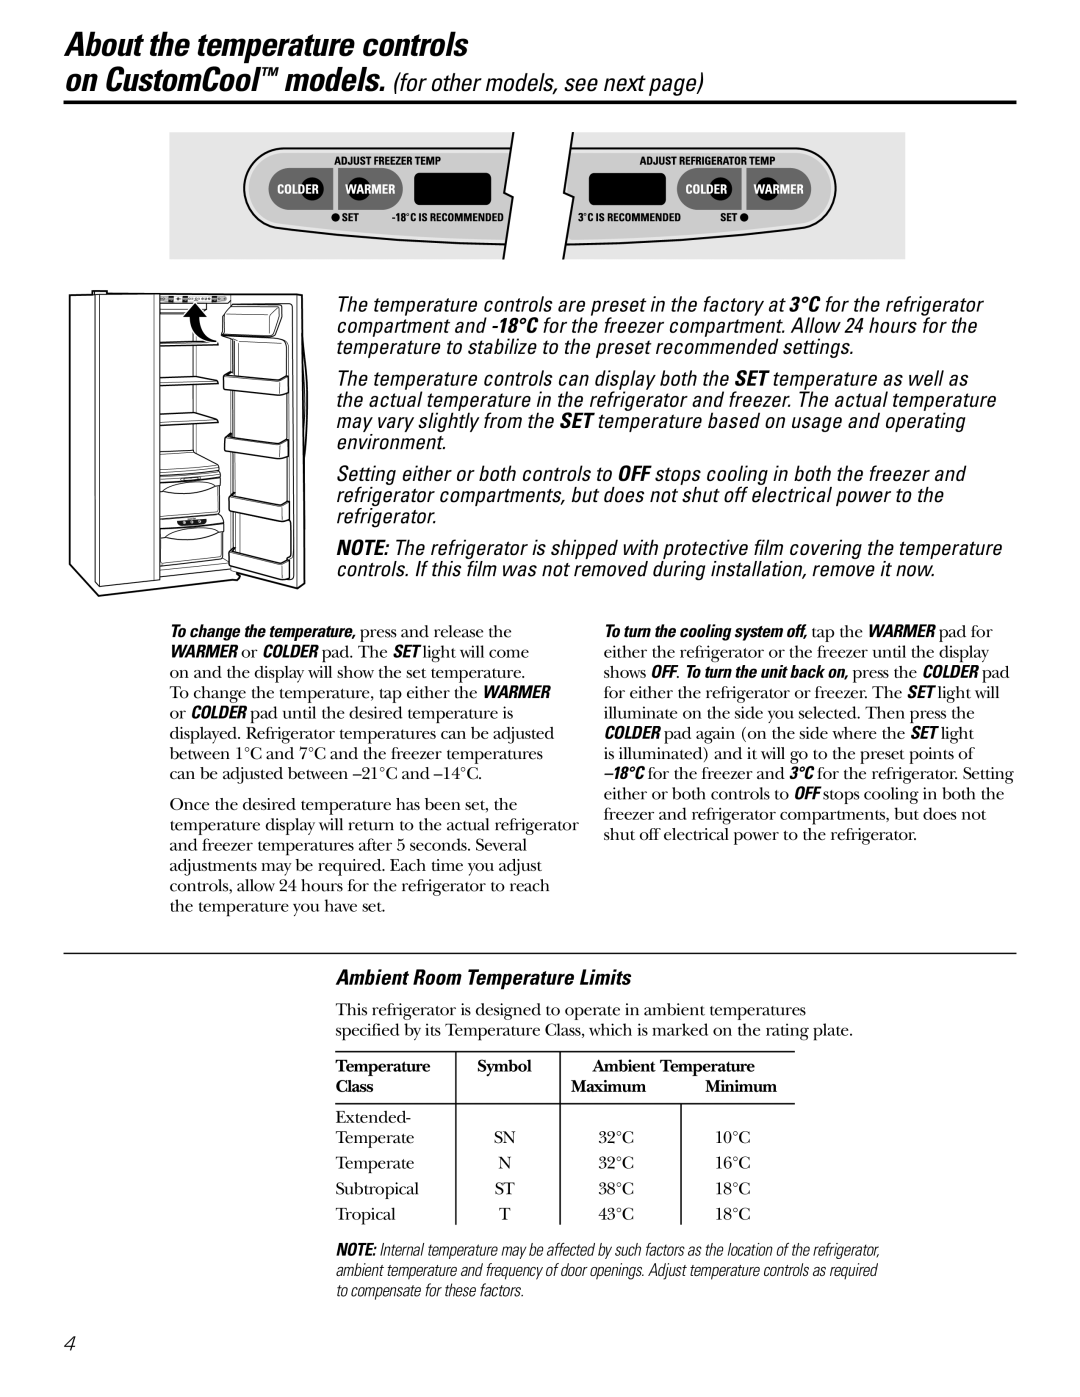 Hotpoint 23 operating instructions About the temperature controls, Ambient Room Temperature Limits 